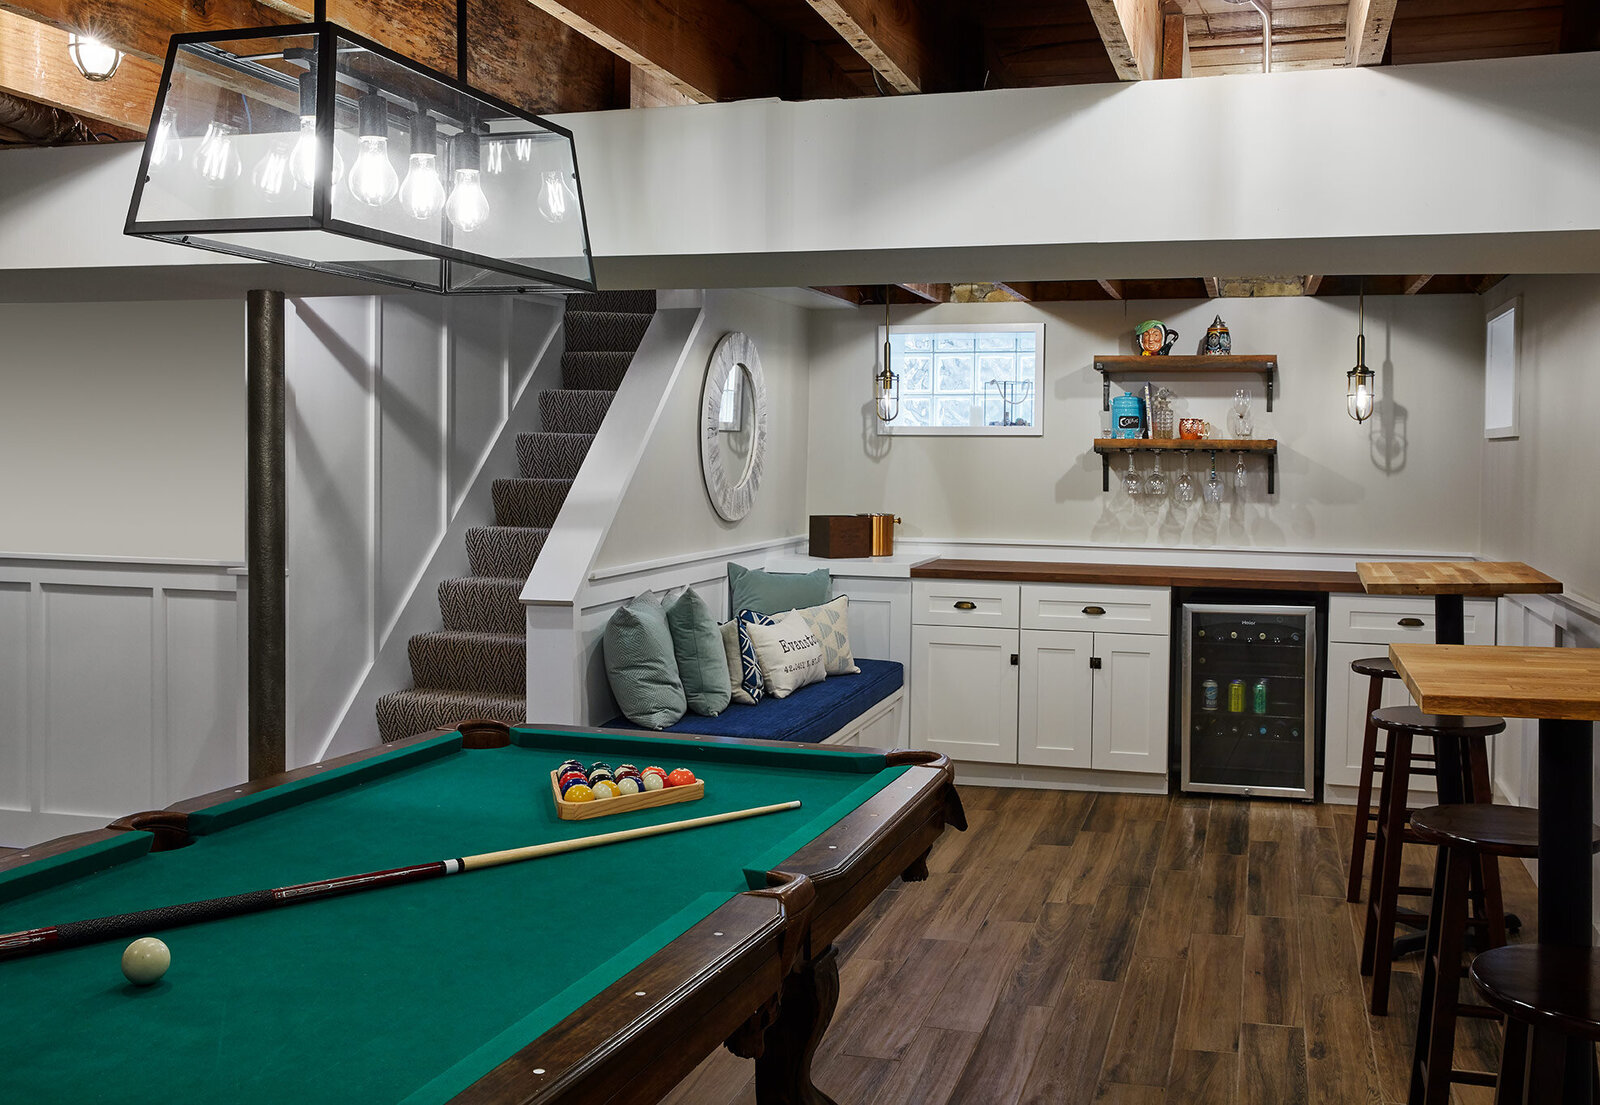 Modern basement design with a pool table